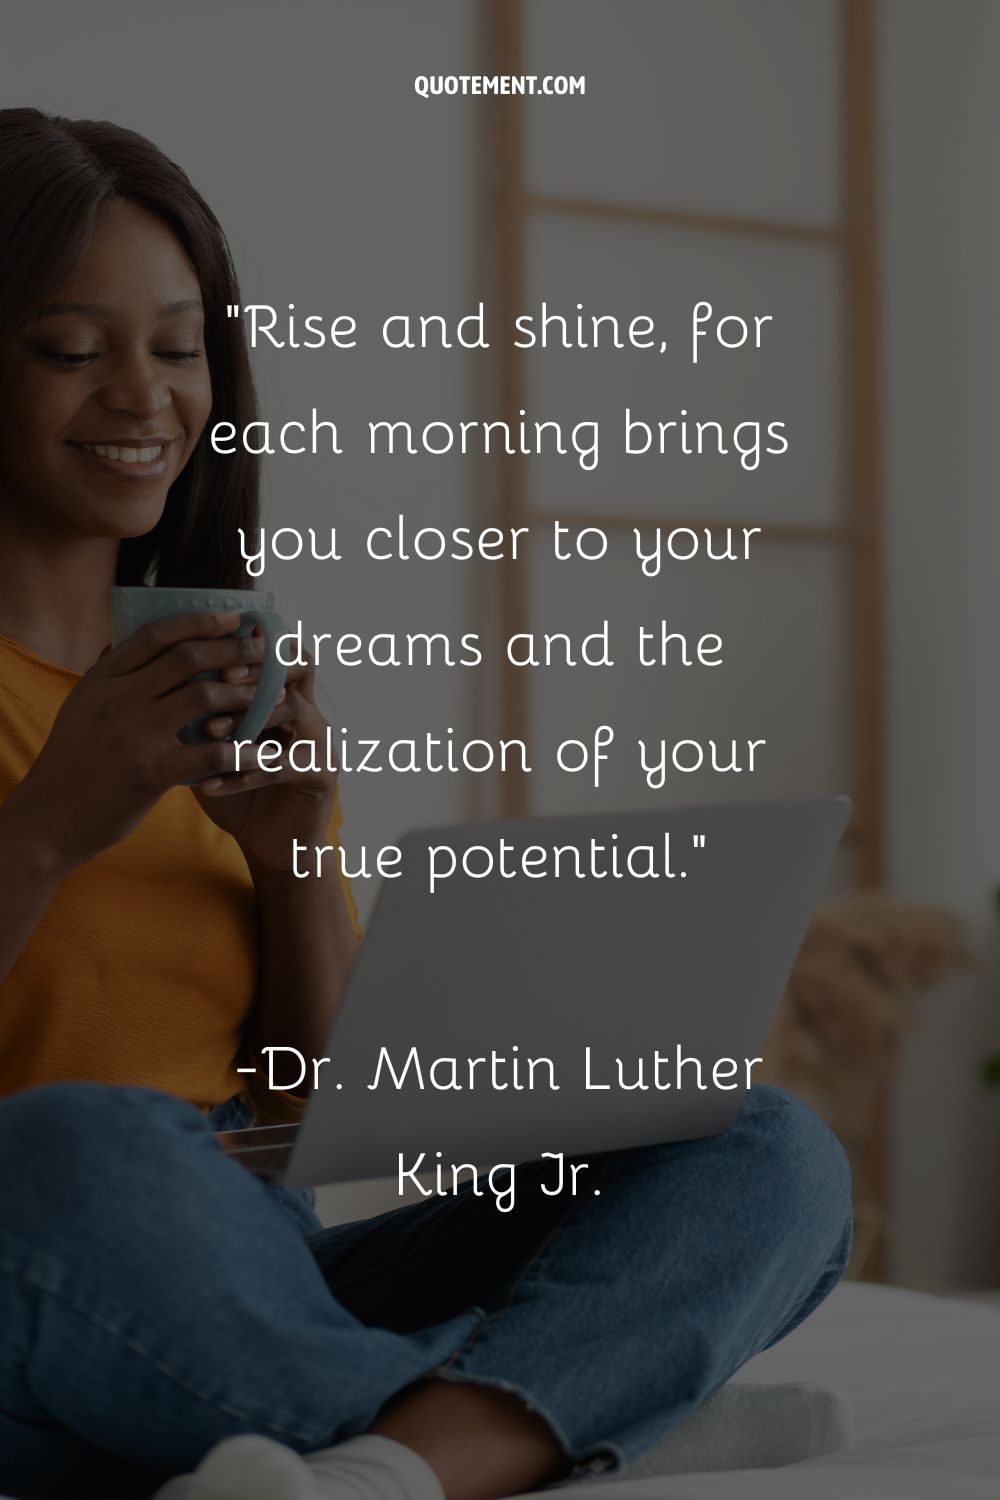 Rise and shine, for each morning brings you closer to your dreams and the realization of your true potential